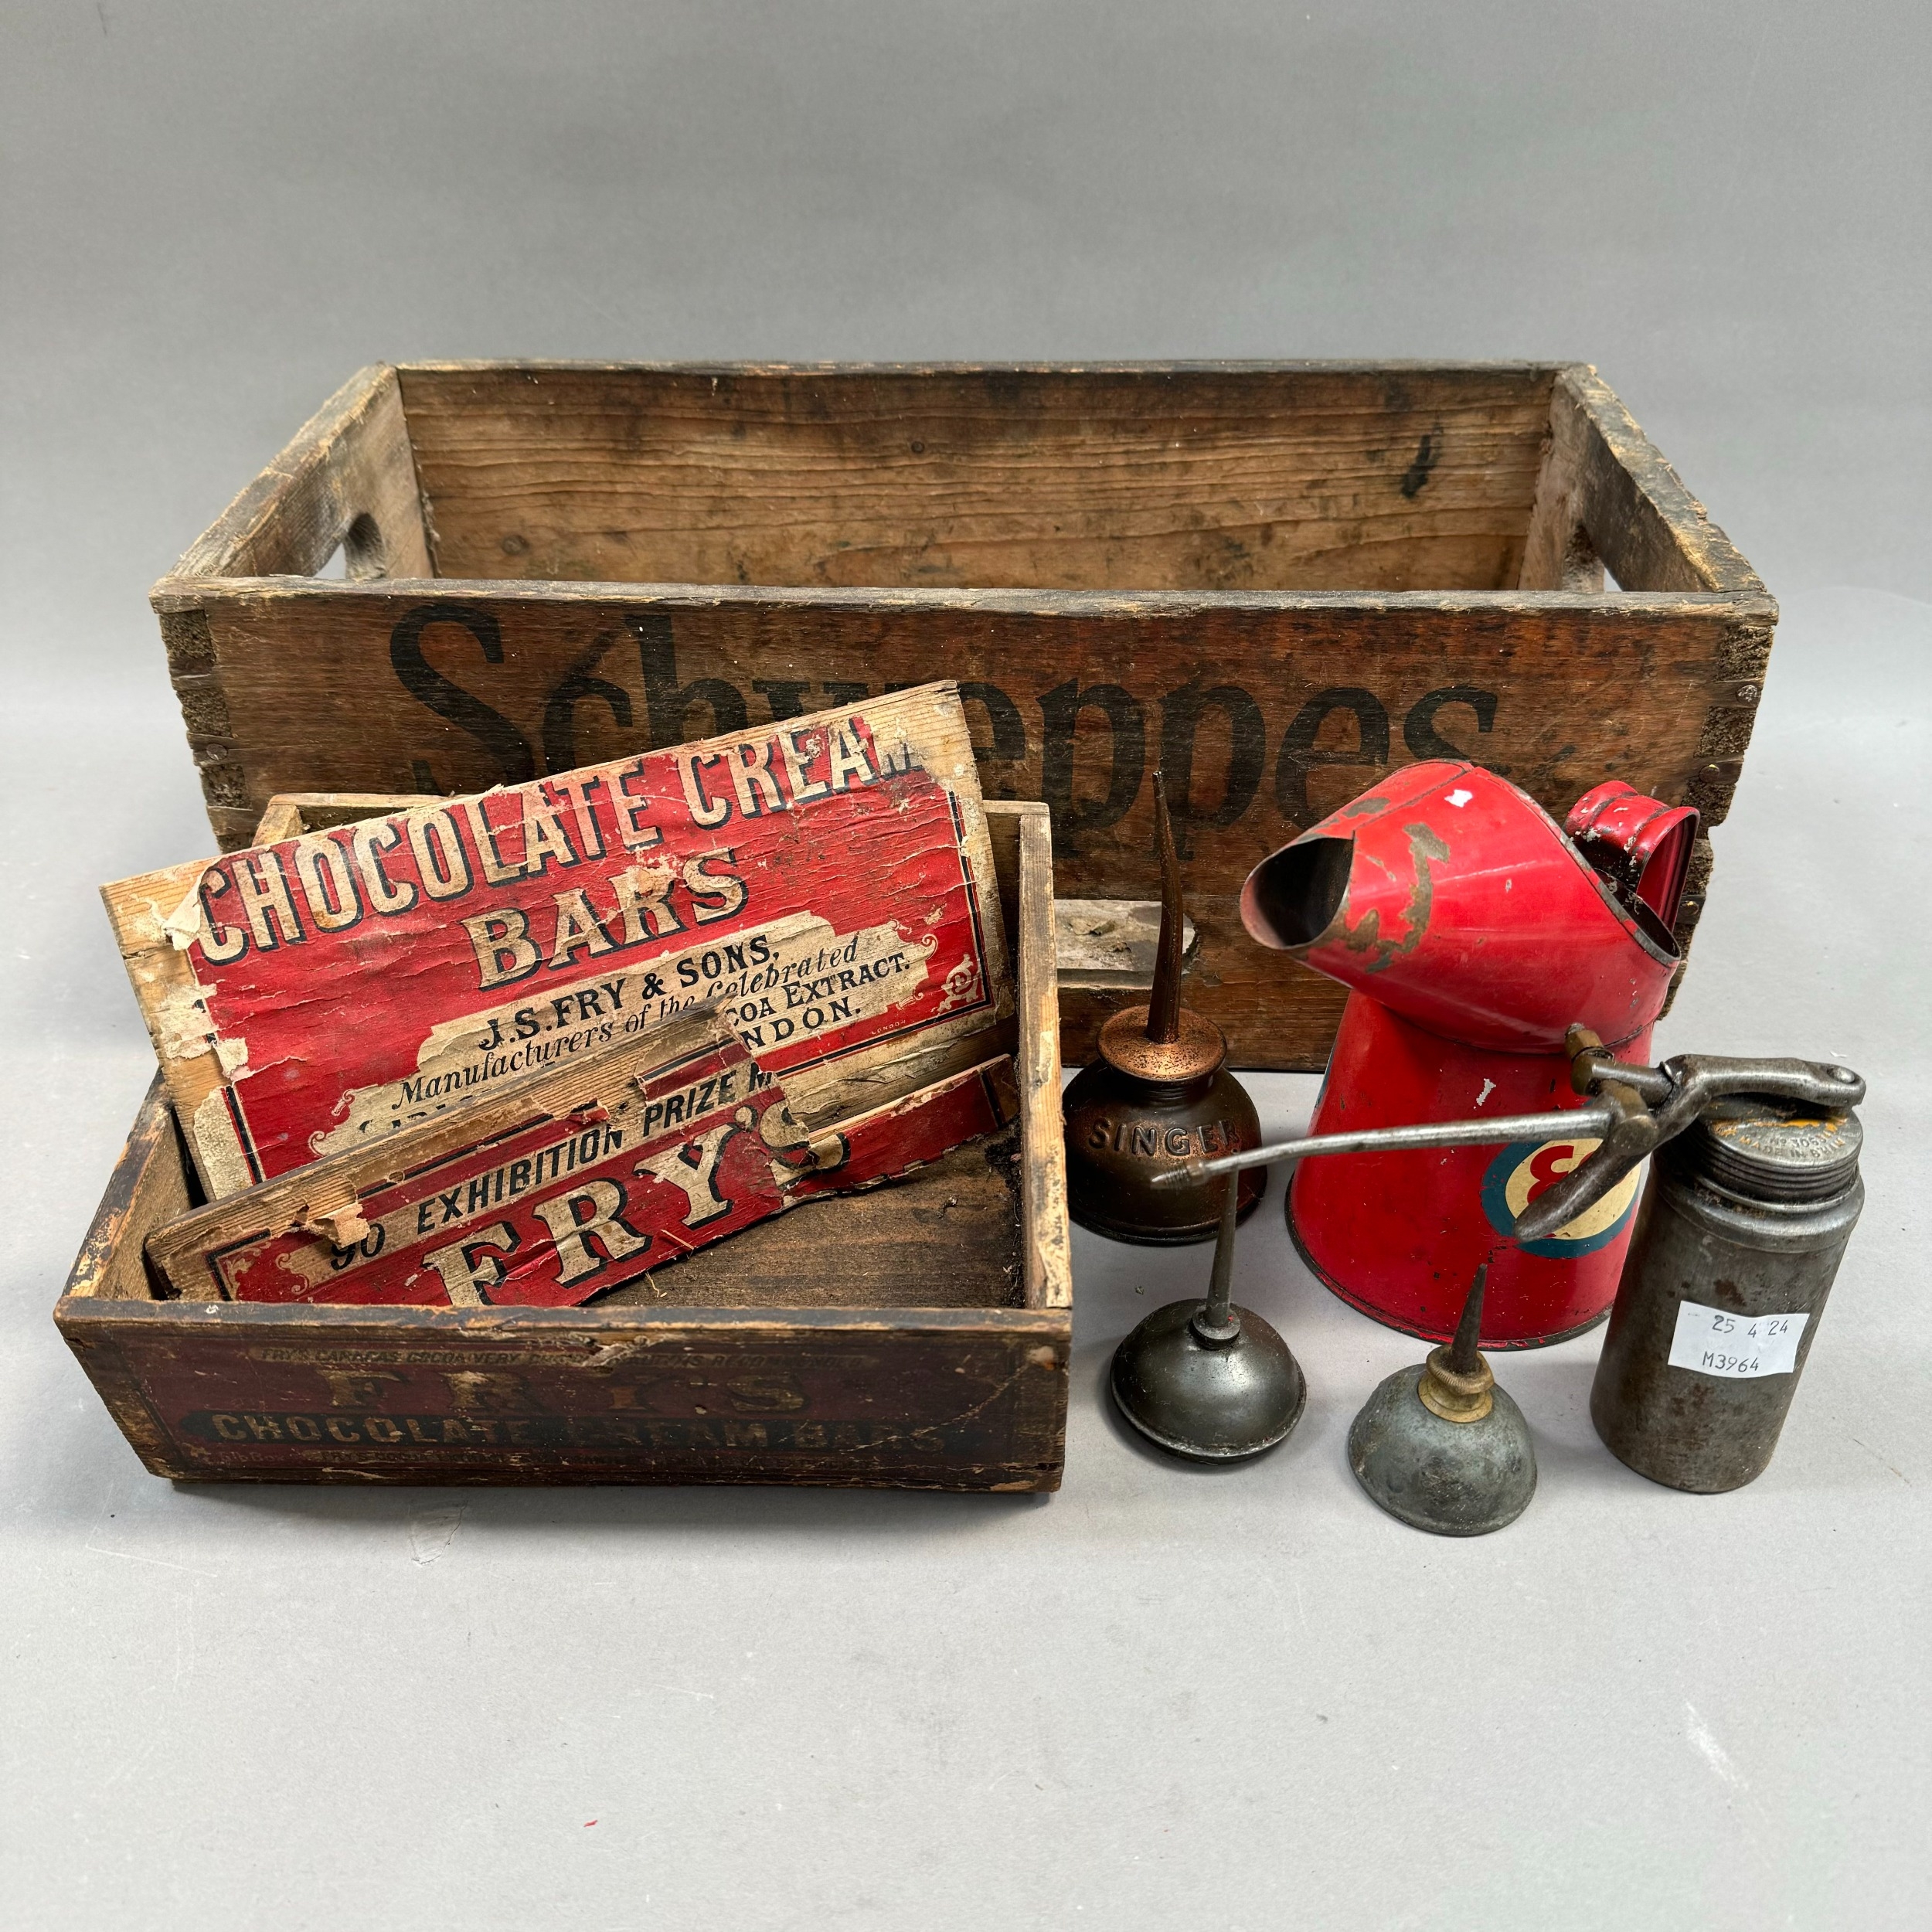 A vintage Schweppes wooden crate with finger grips, a small wooden box for Frys chocolate cream bars